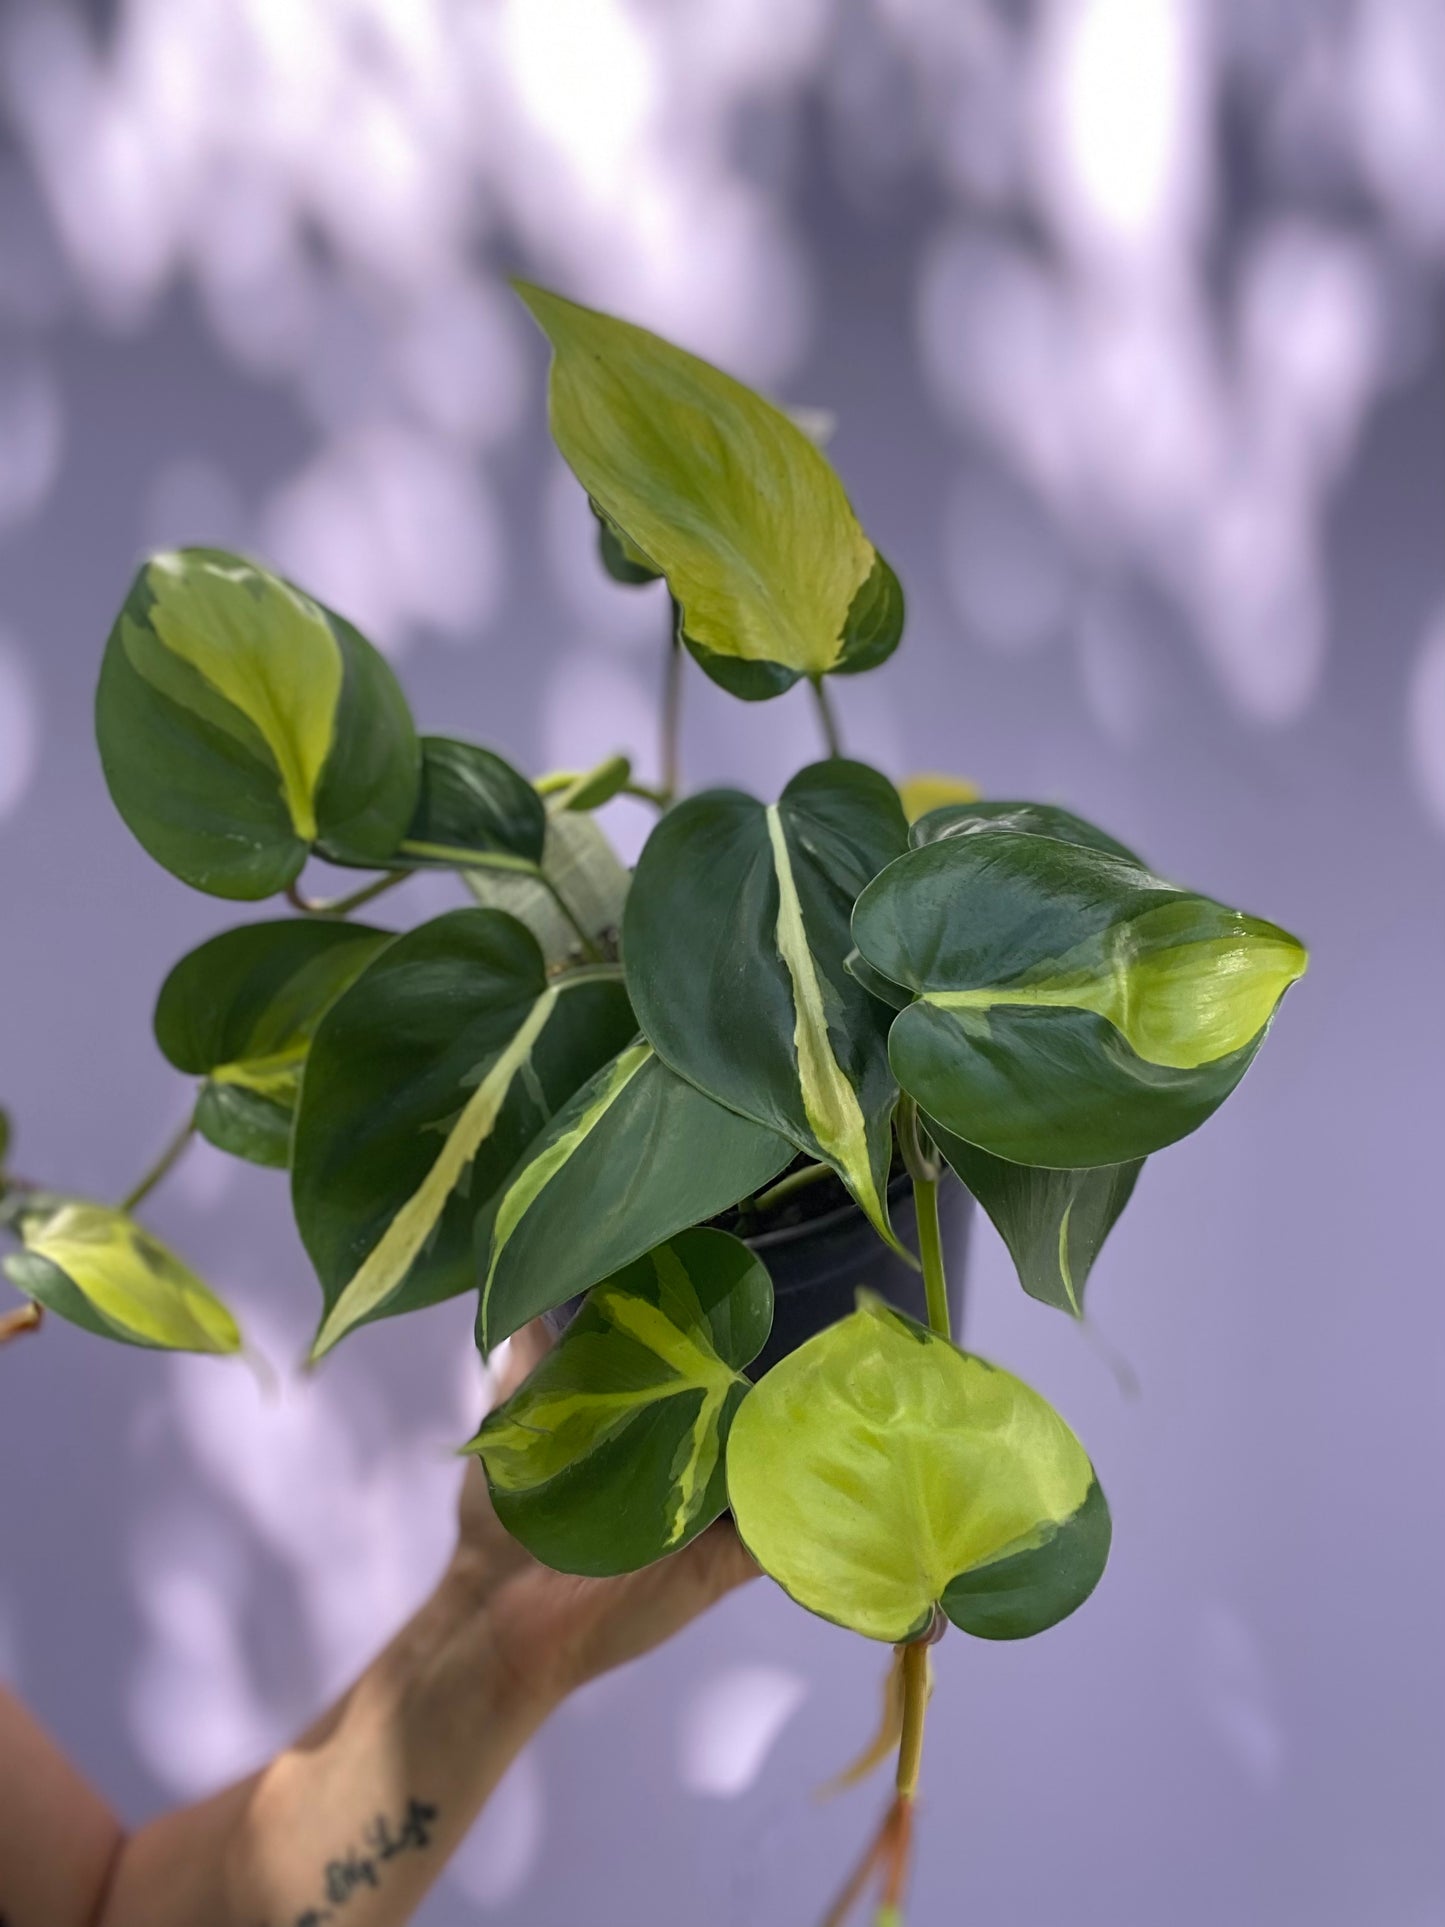 Philodendron Brasil - These are gorgeous!